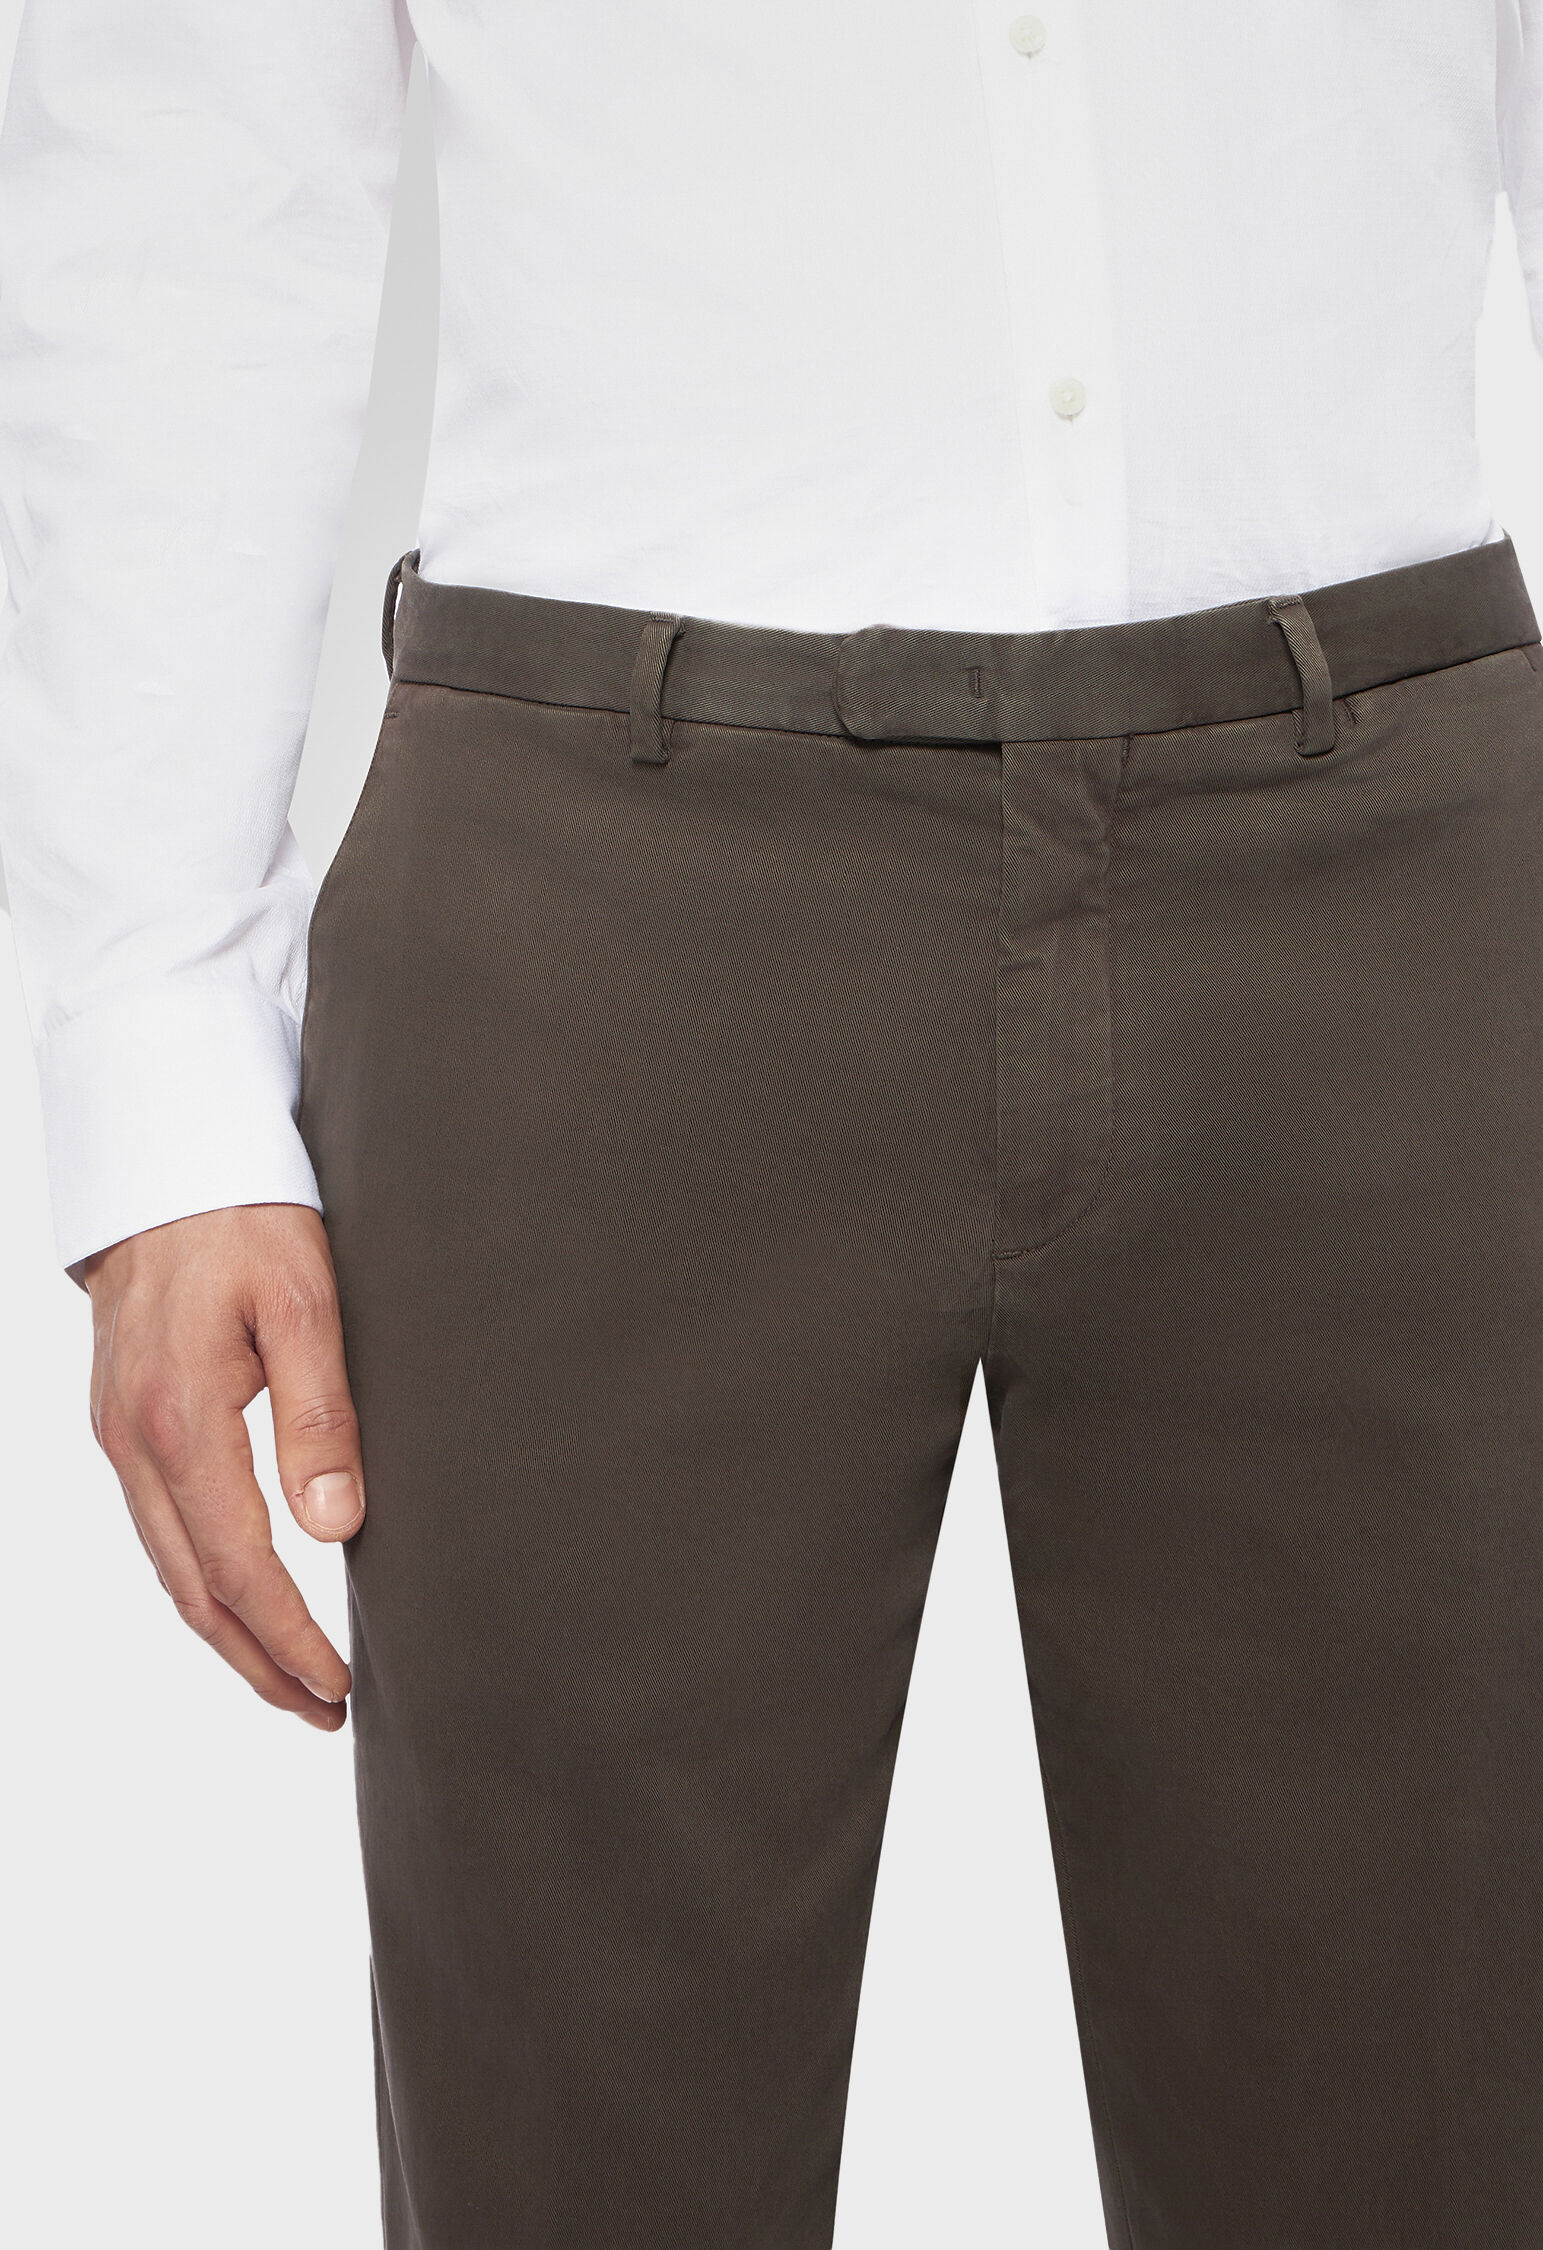 Paul and Shark Stretch Cotton Slim Winter Chino Trousers in Beige